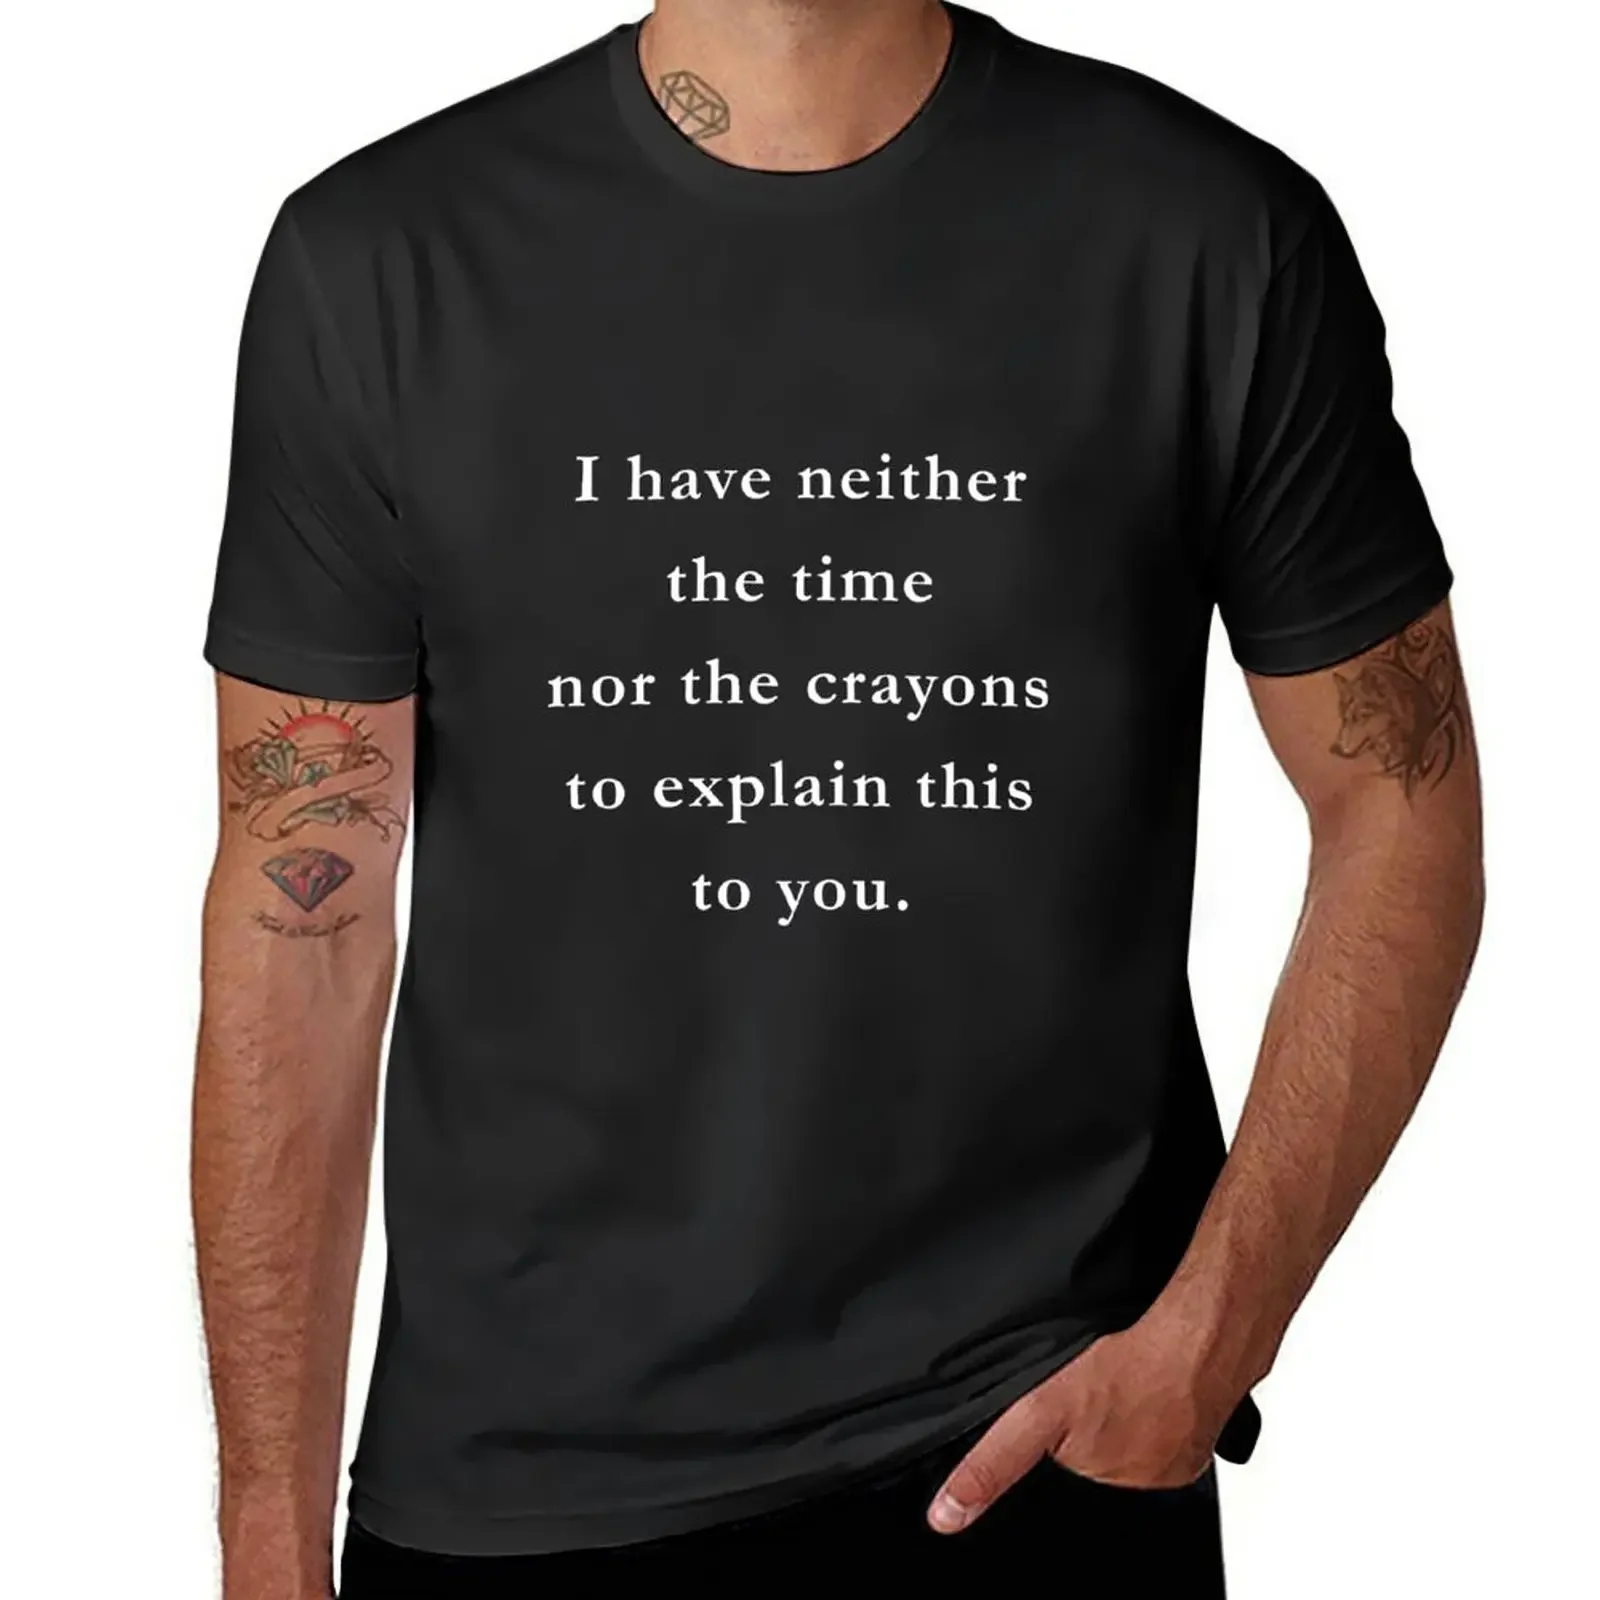 

I have neither the time nor the crayons to explain this to you. T-Shirt boys animal print plus sizes slim fit t shirts for men